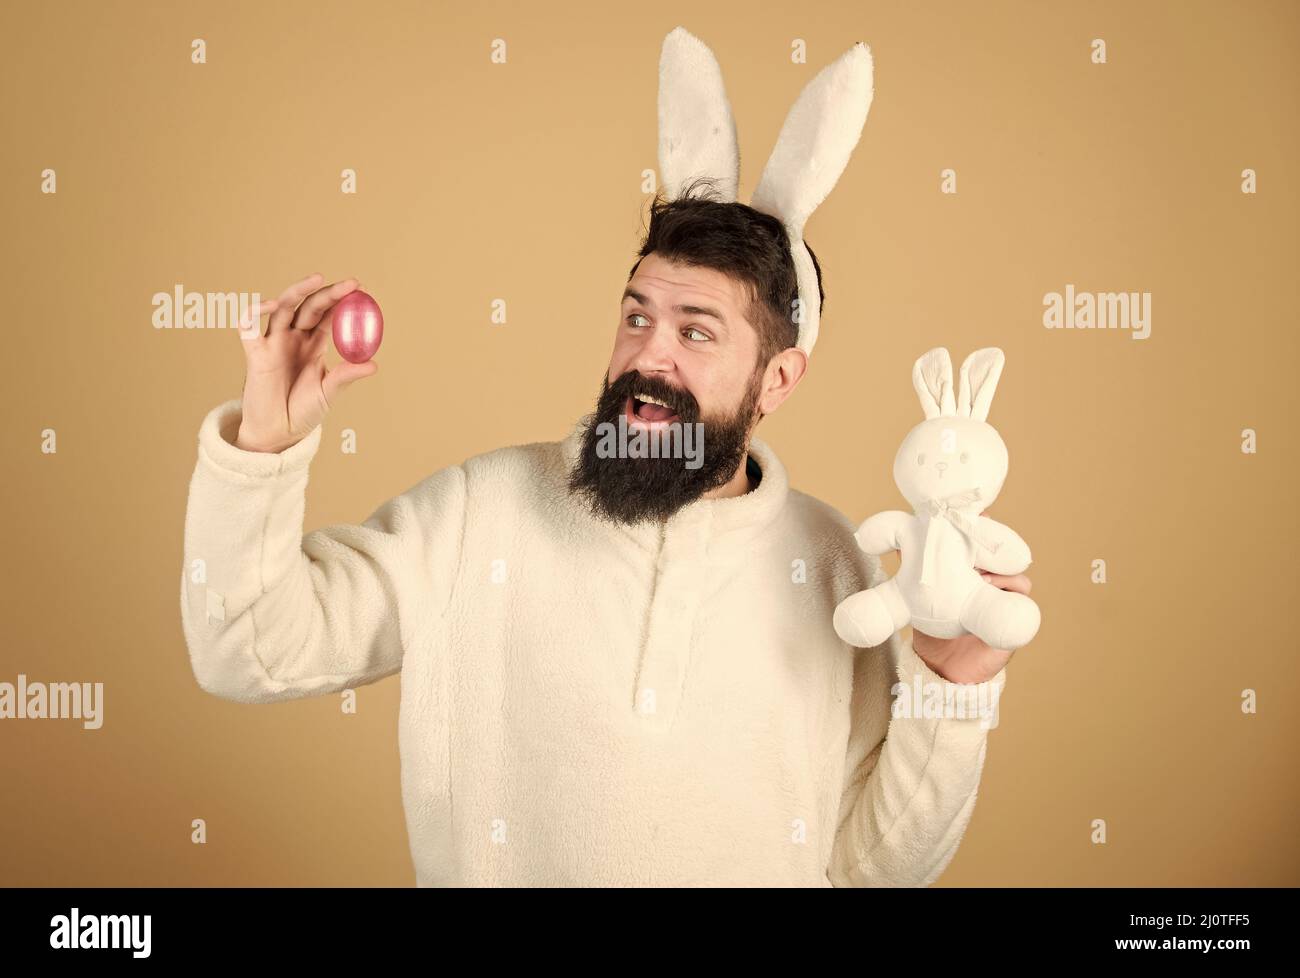 Easter activities concept. Weirdo concept. Celebrate Easter. Guy bearded hipster weird bunny with long white ears beige background. Easter rabbit. Man Stock Photo